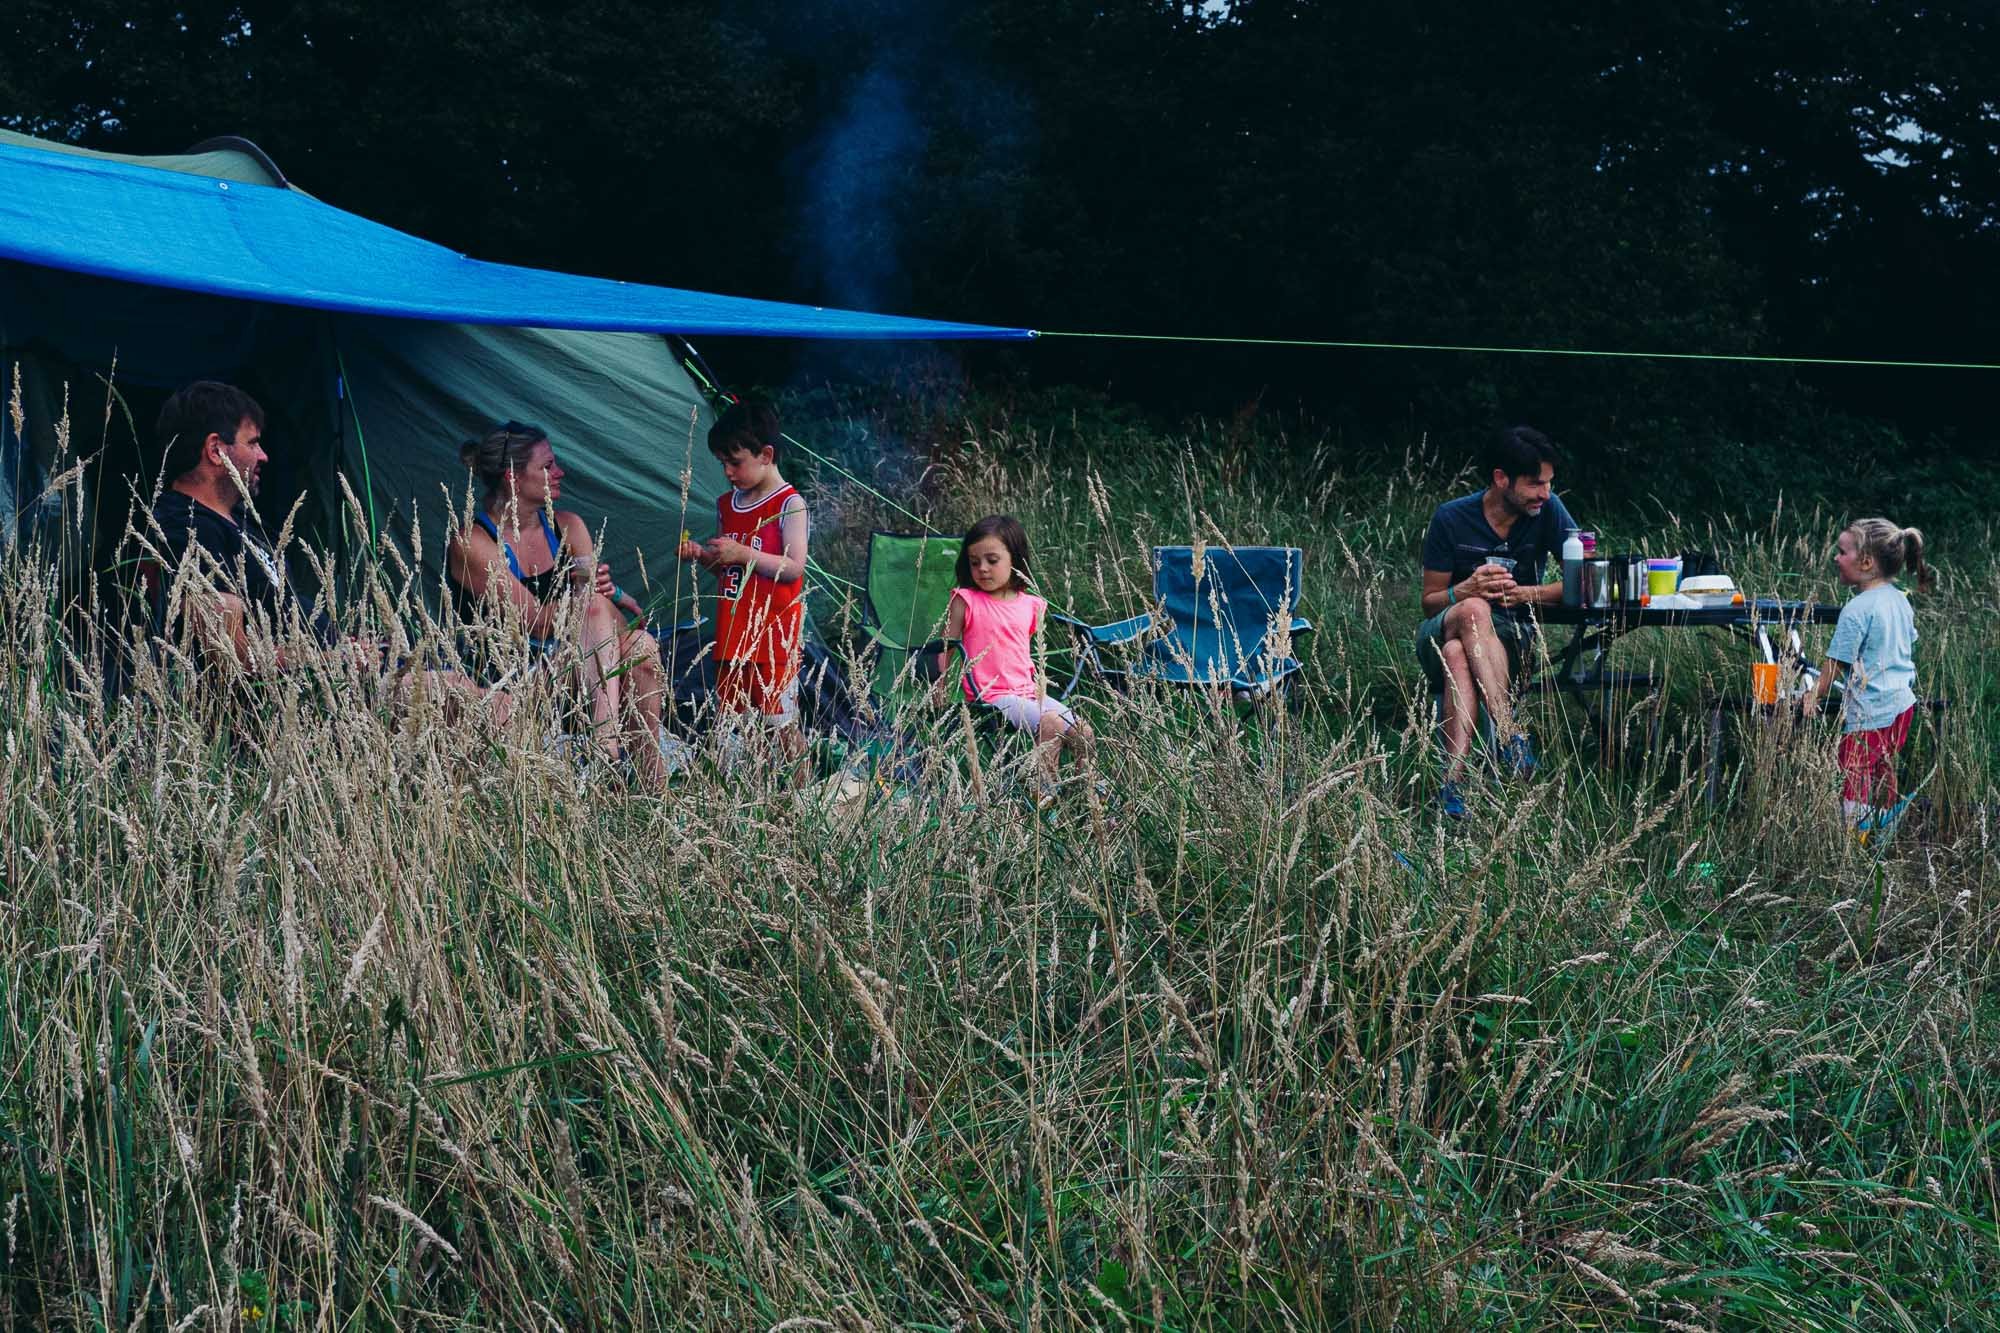 family-photographer-burgess-hill-sussex-documentary-family-photos-campsite-tent-long-grass.jpg